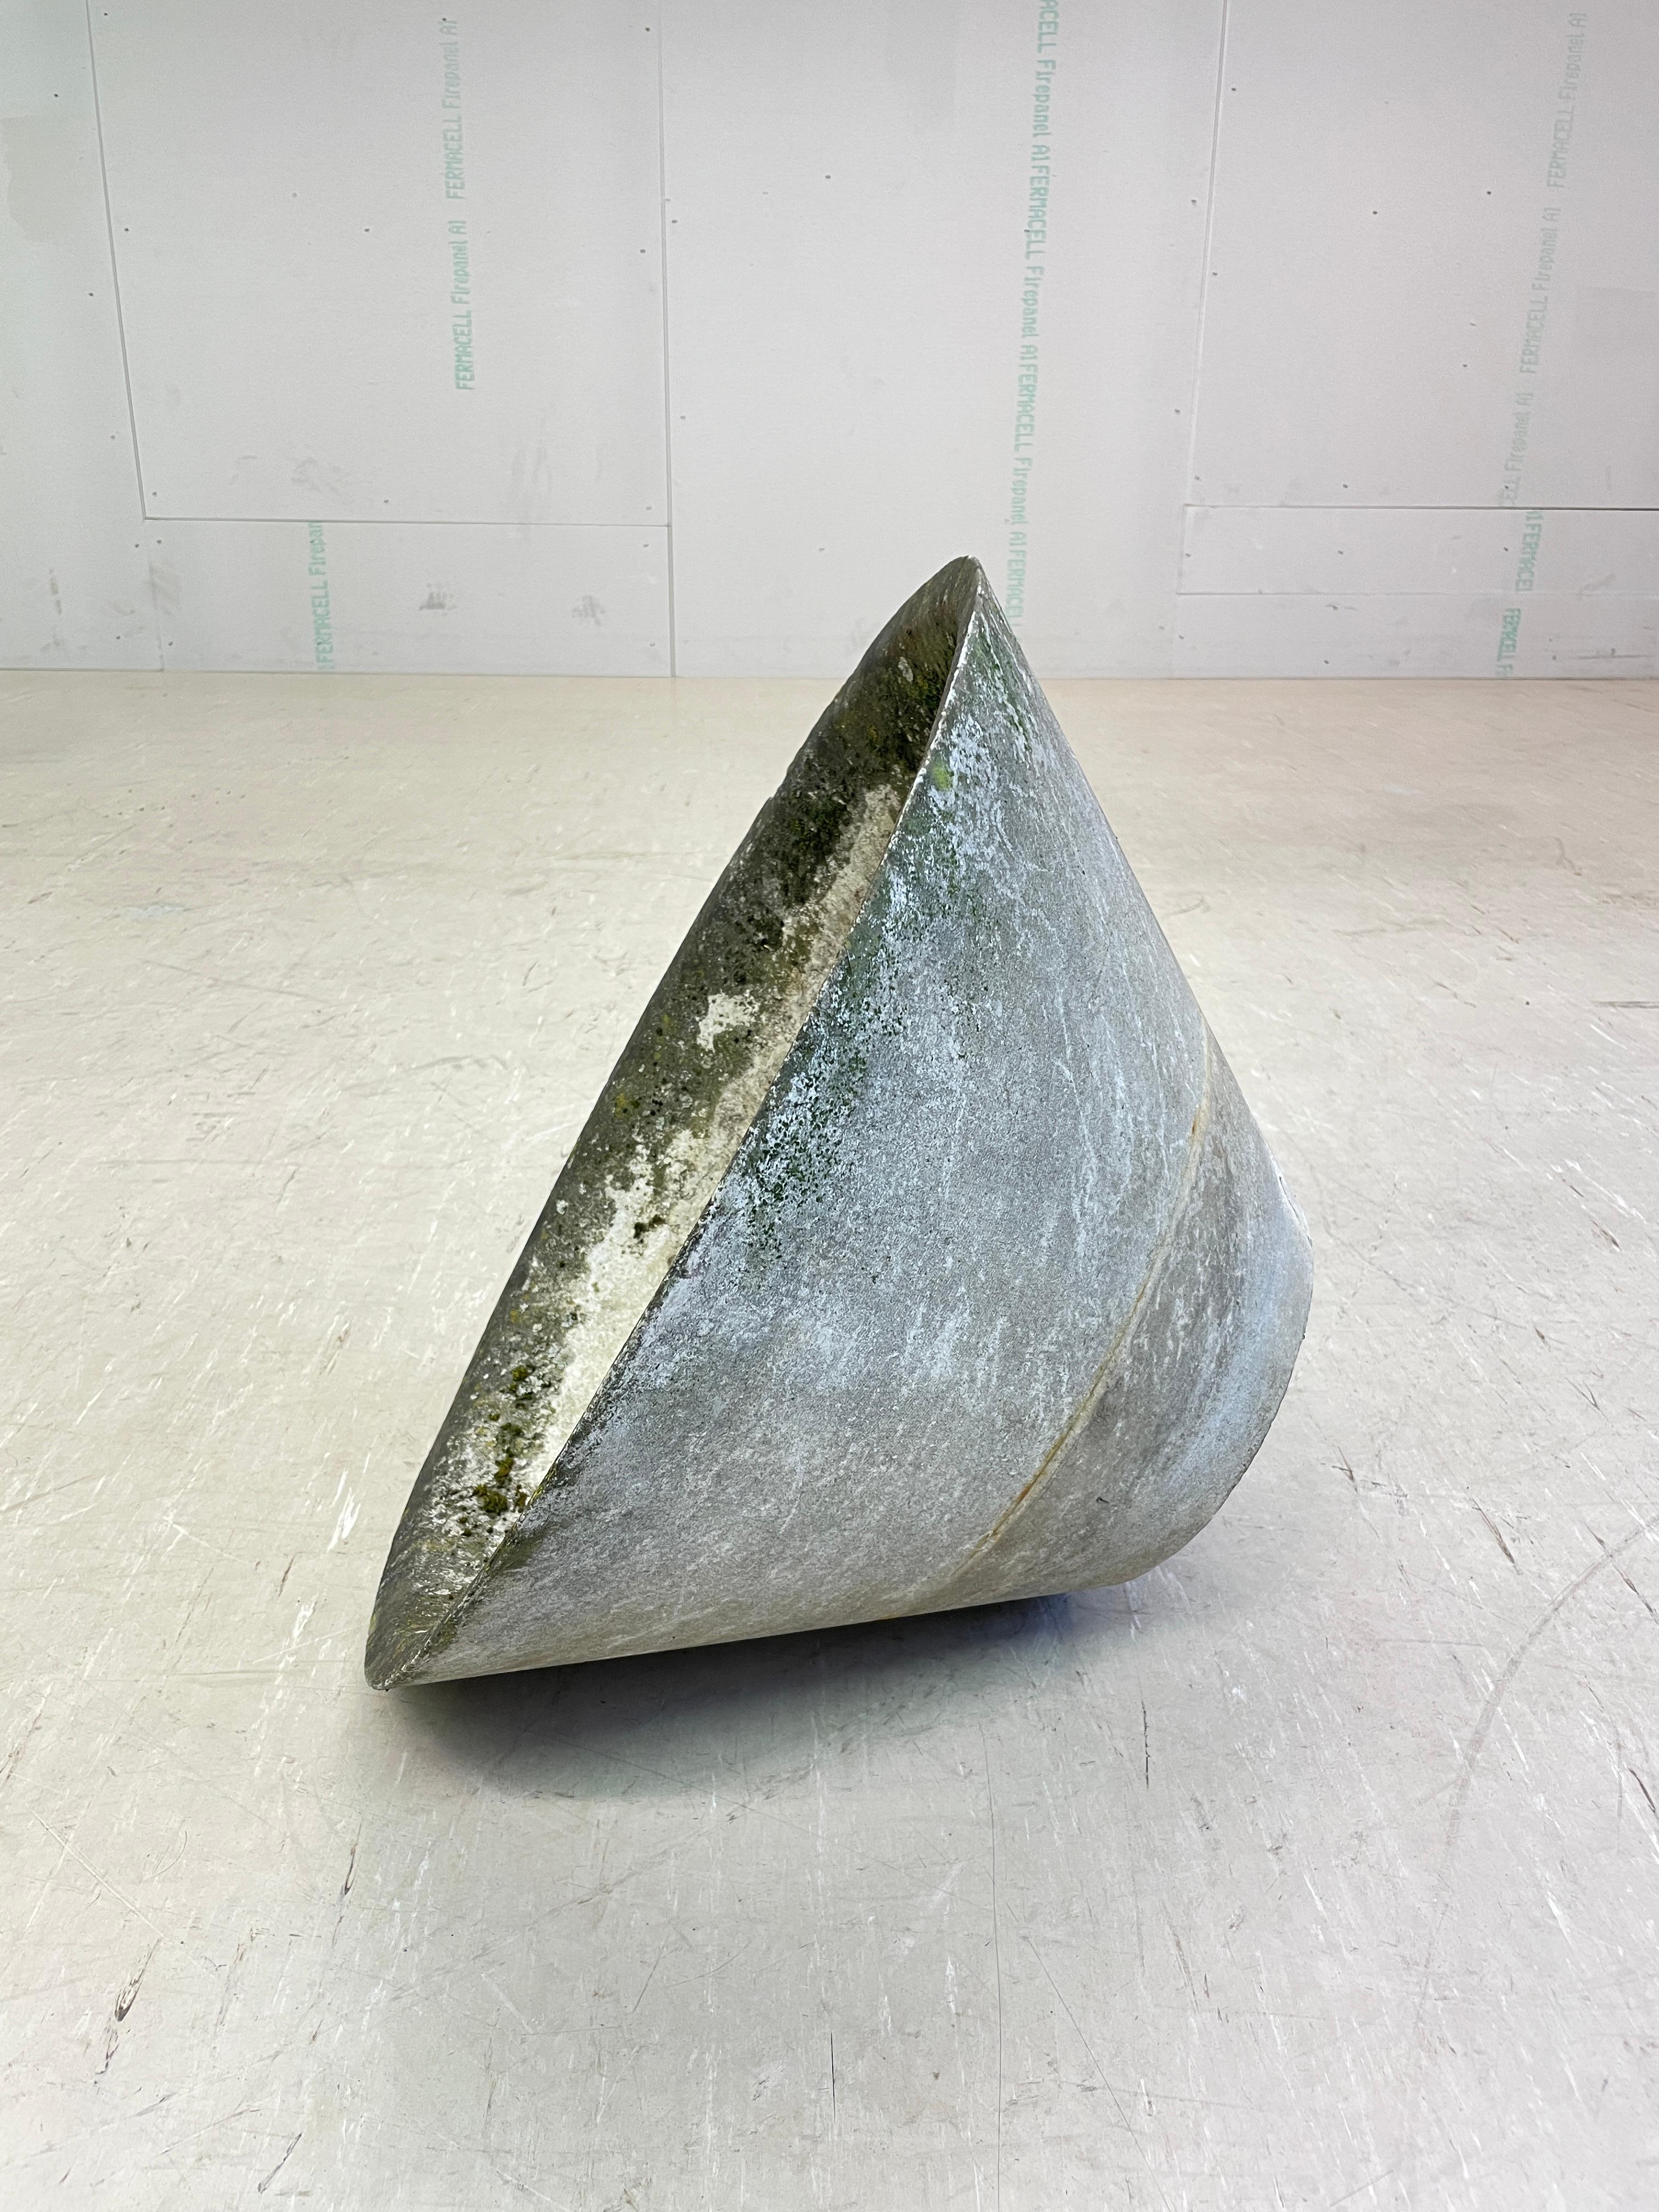 Concrete Willy Guhl Conical Planter - Eternit AG, Switzerland #6 For Sale